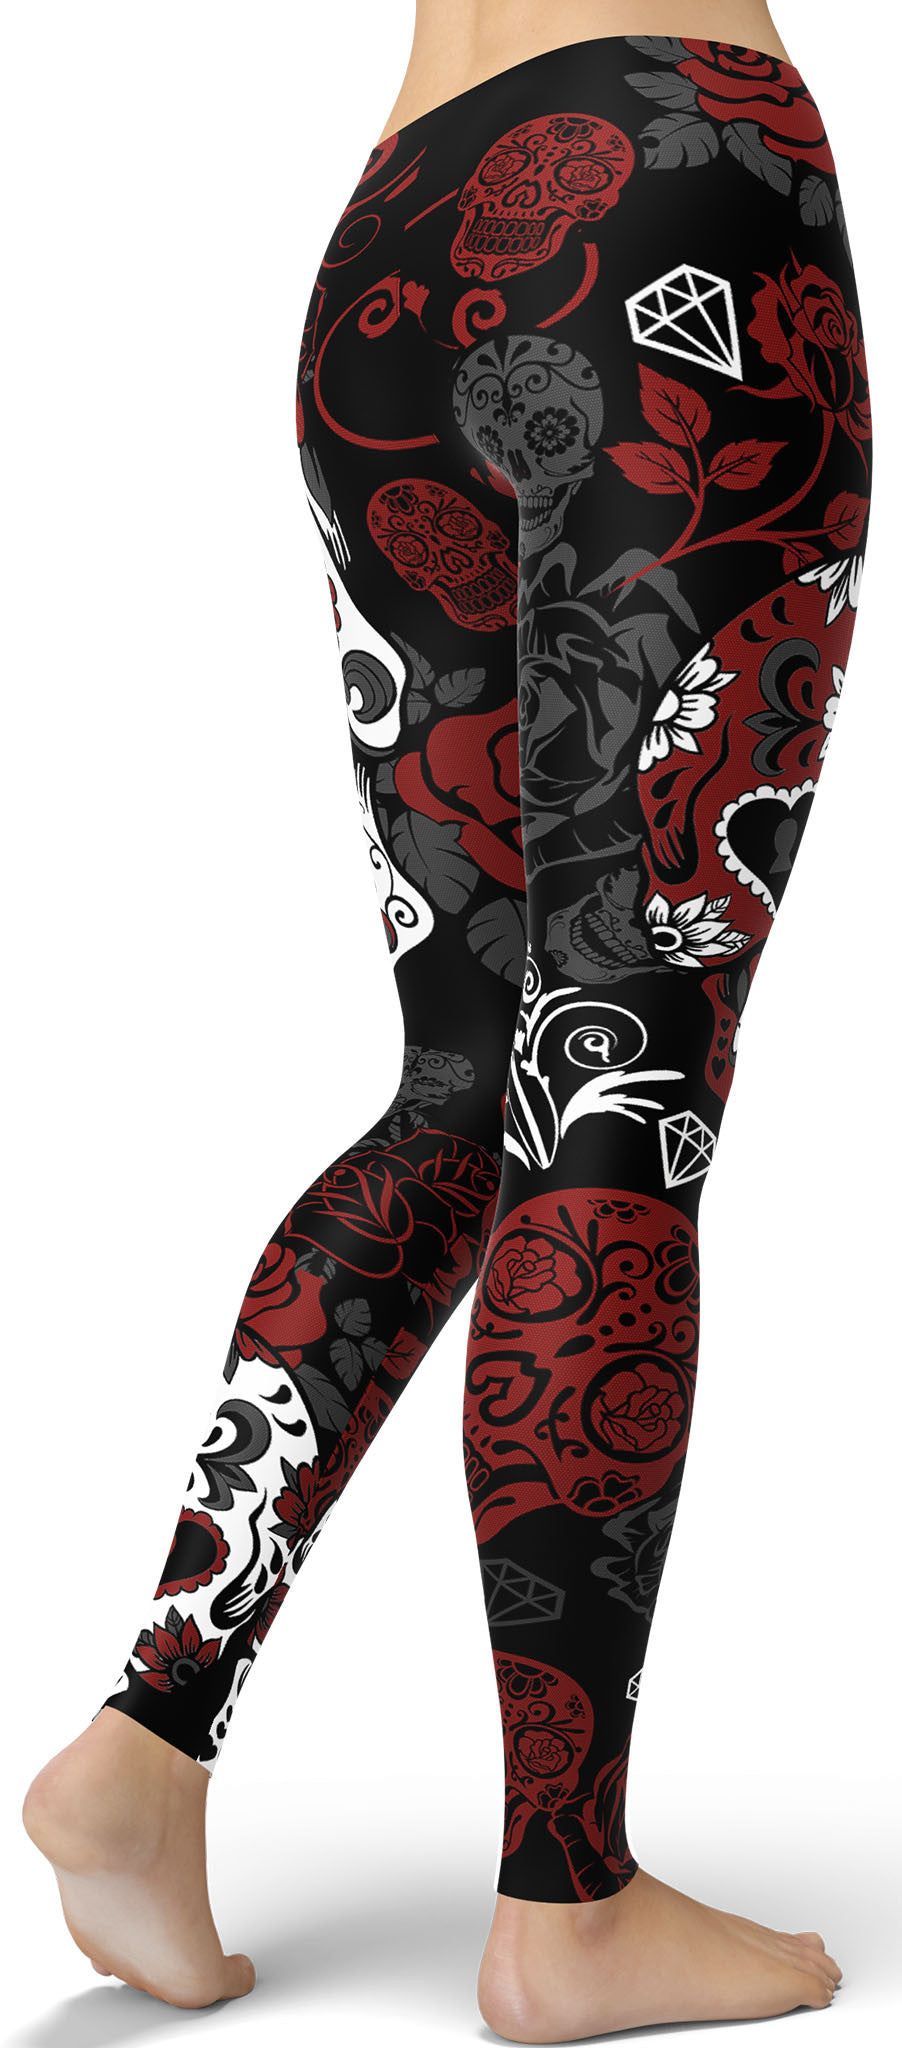 Skull Patterned Red Coloured Tights